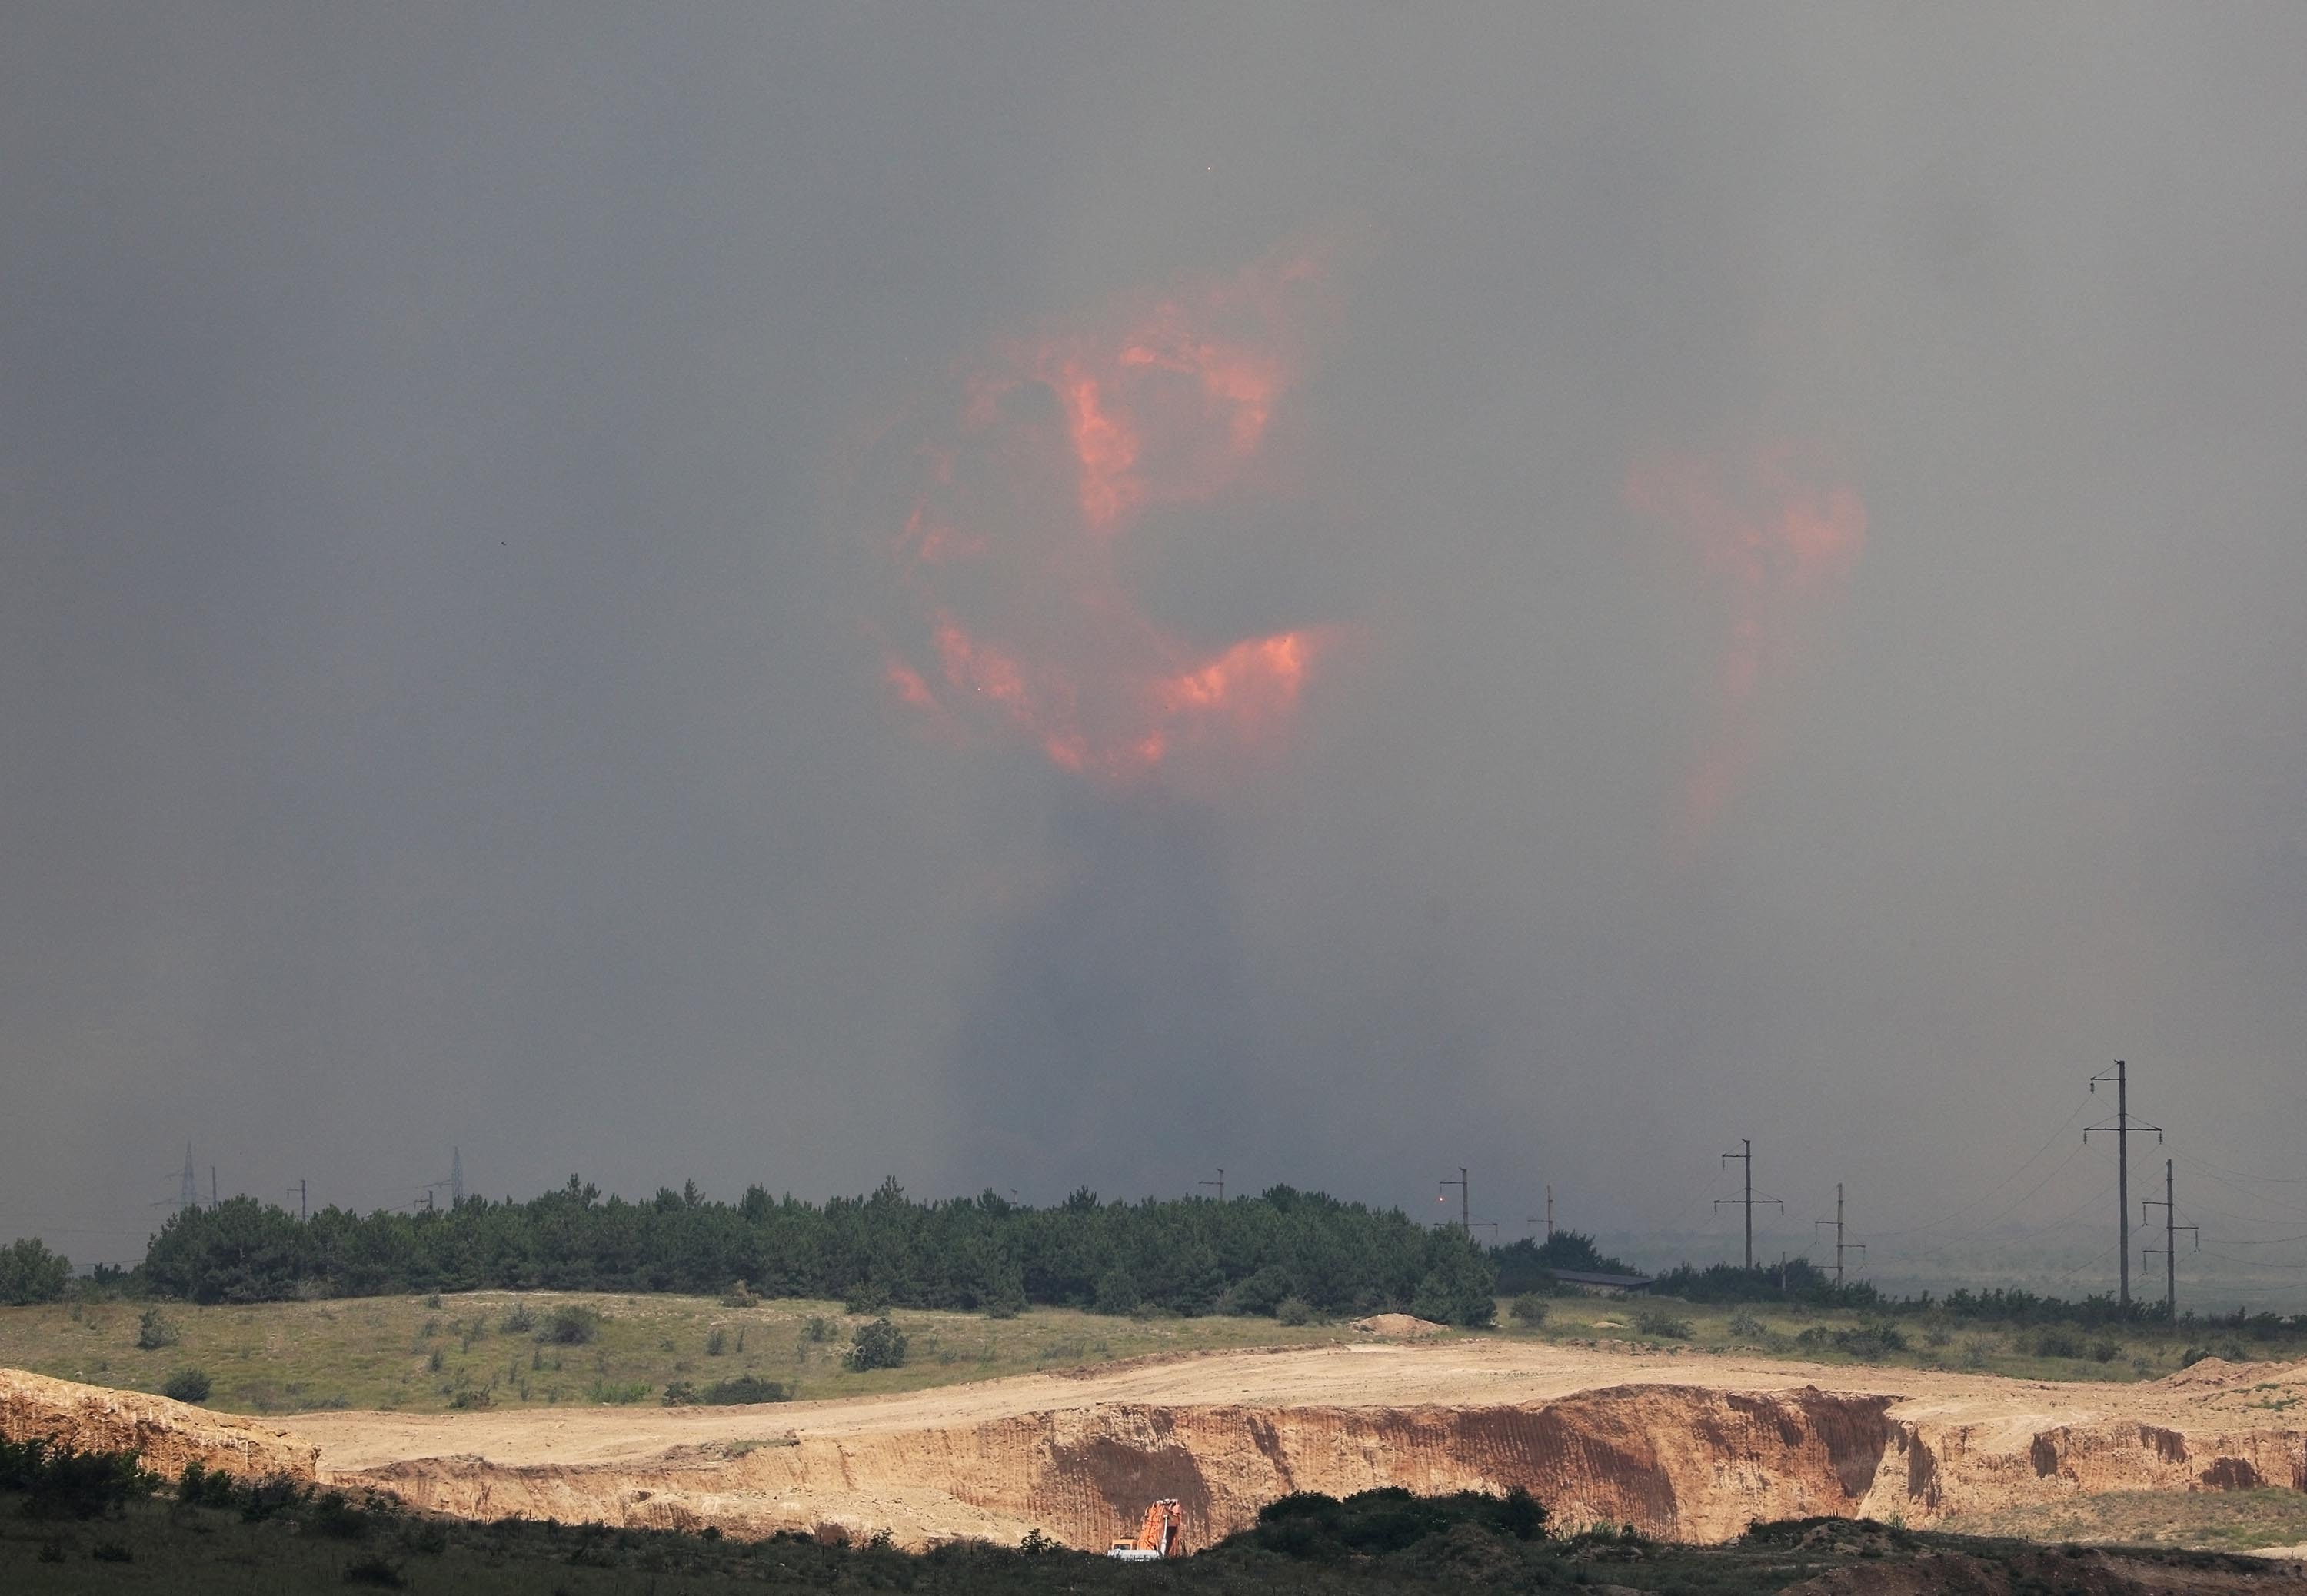 Smoke and flames rise from an explosion during a fire at a military training ground in Crimea’s Kirovsky district, on Wednesday, July 19.